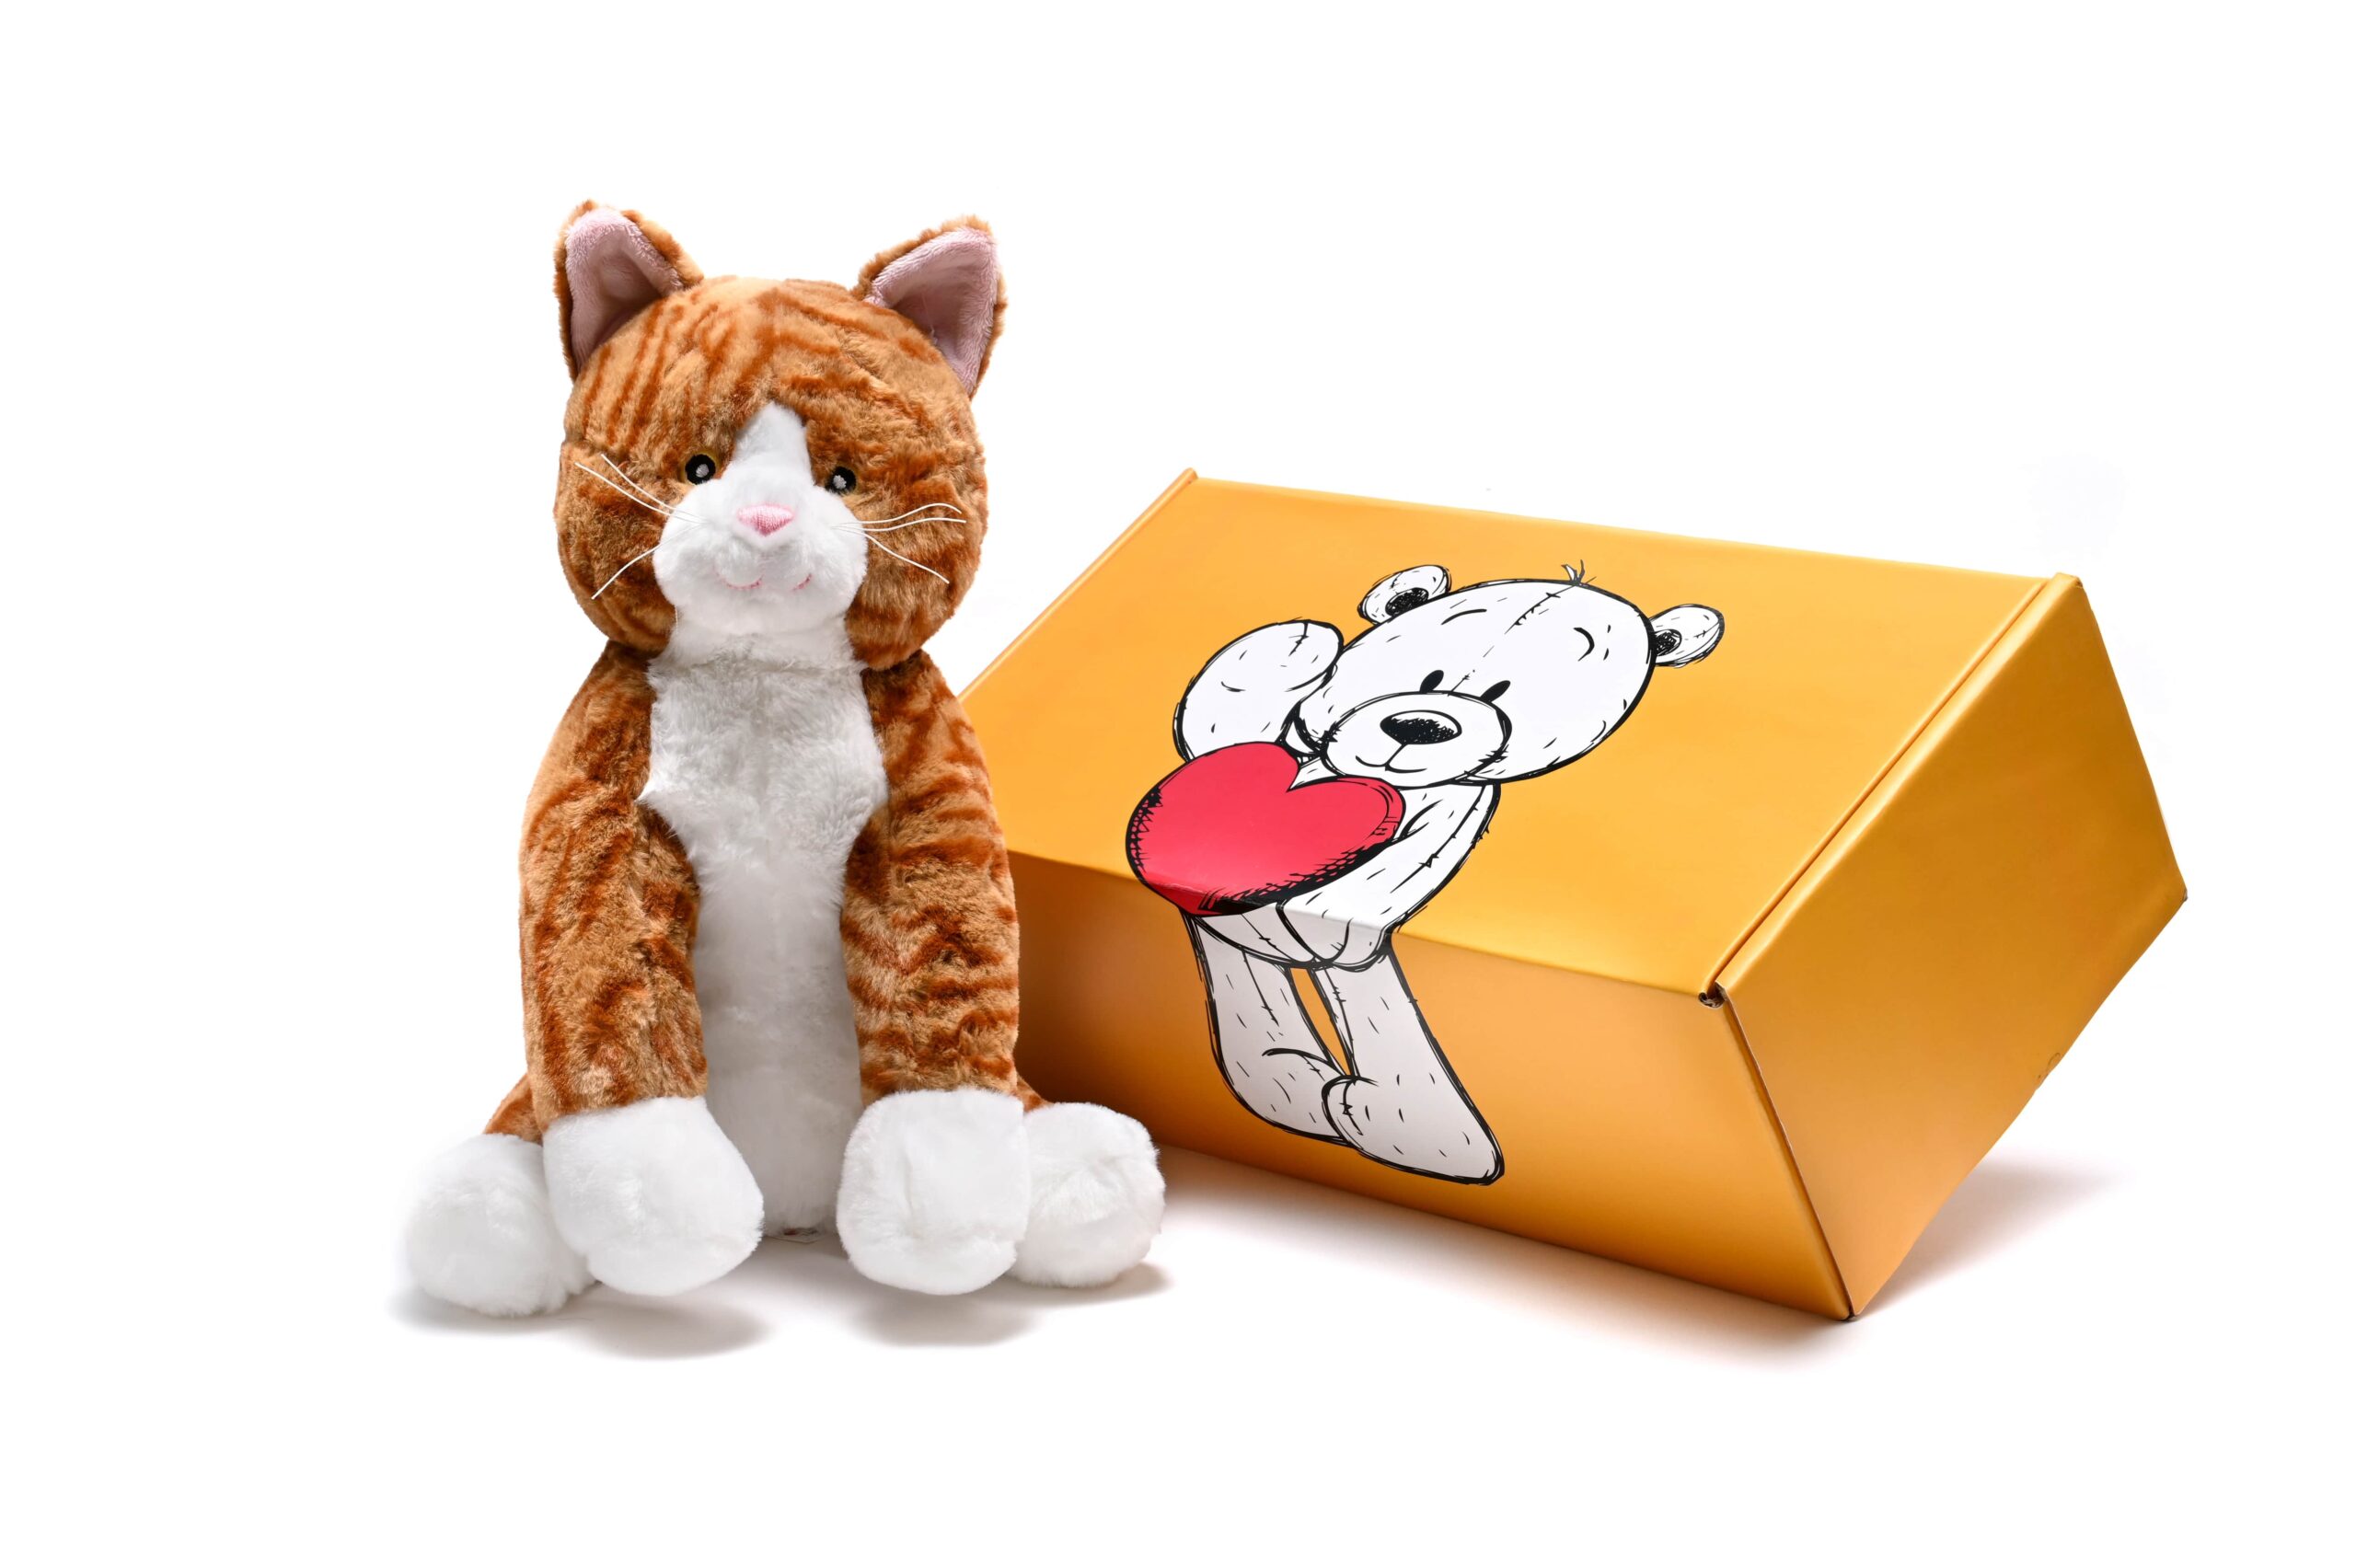 a stuffed cat toy next to a box